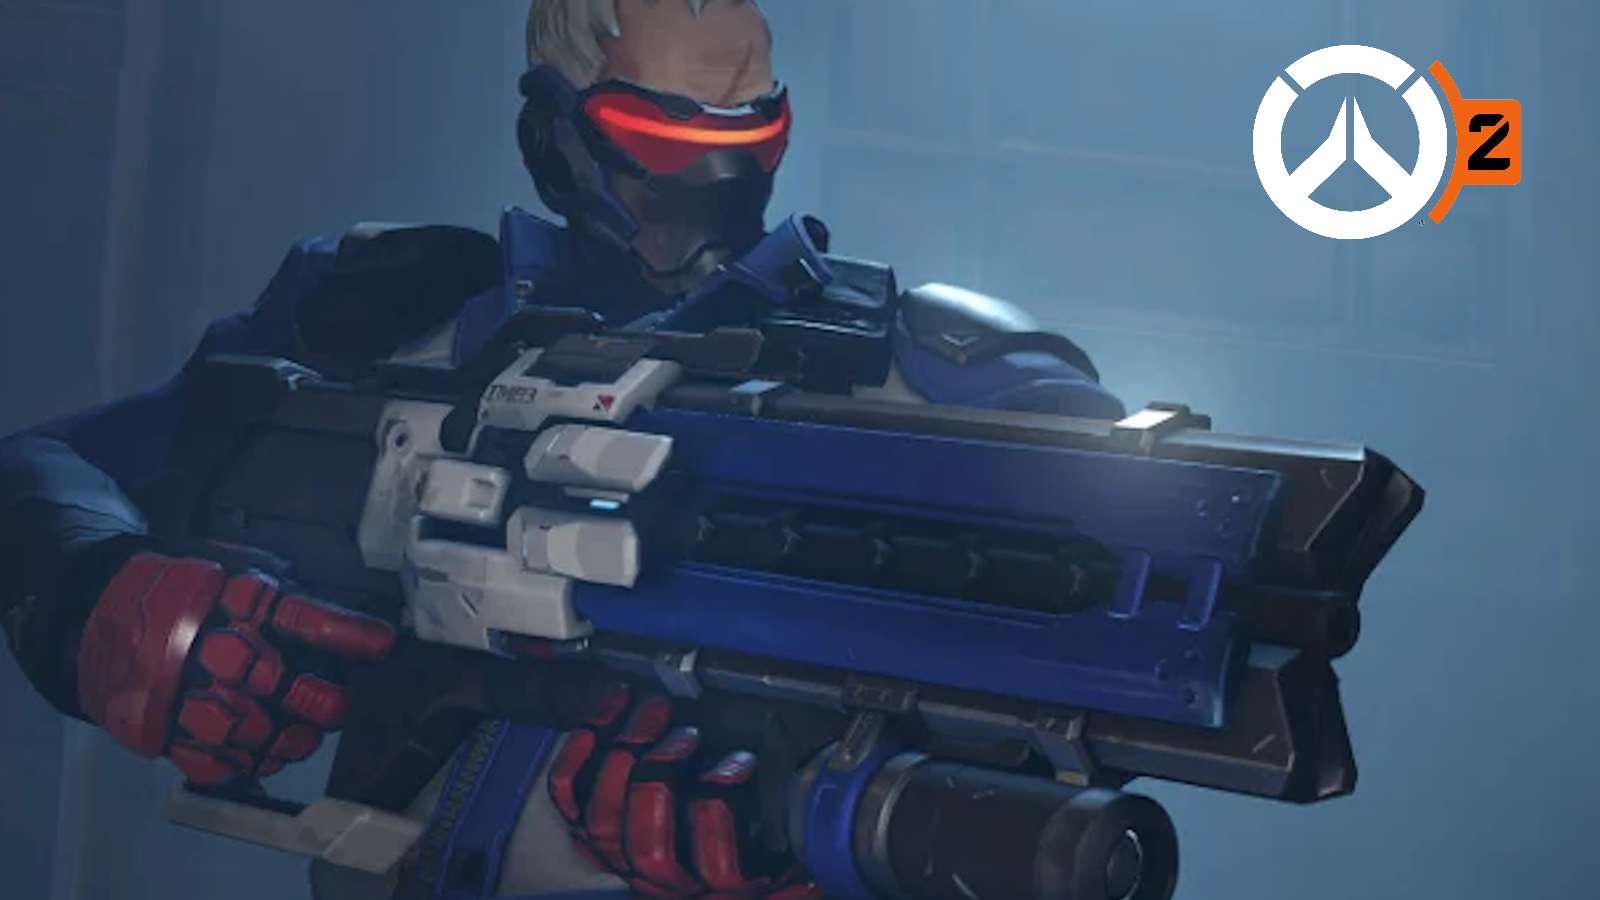 soldier 76 in ow2